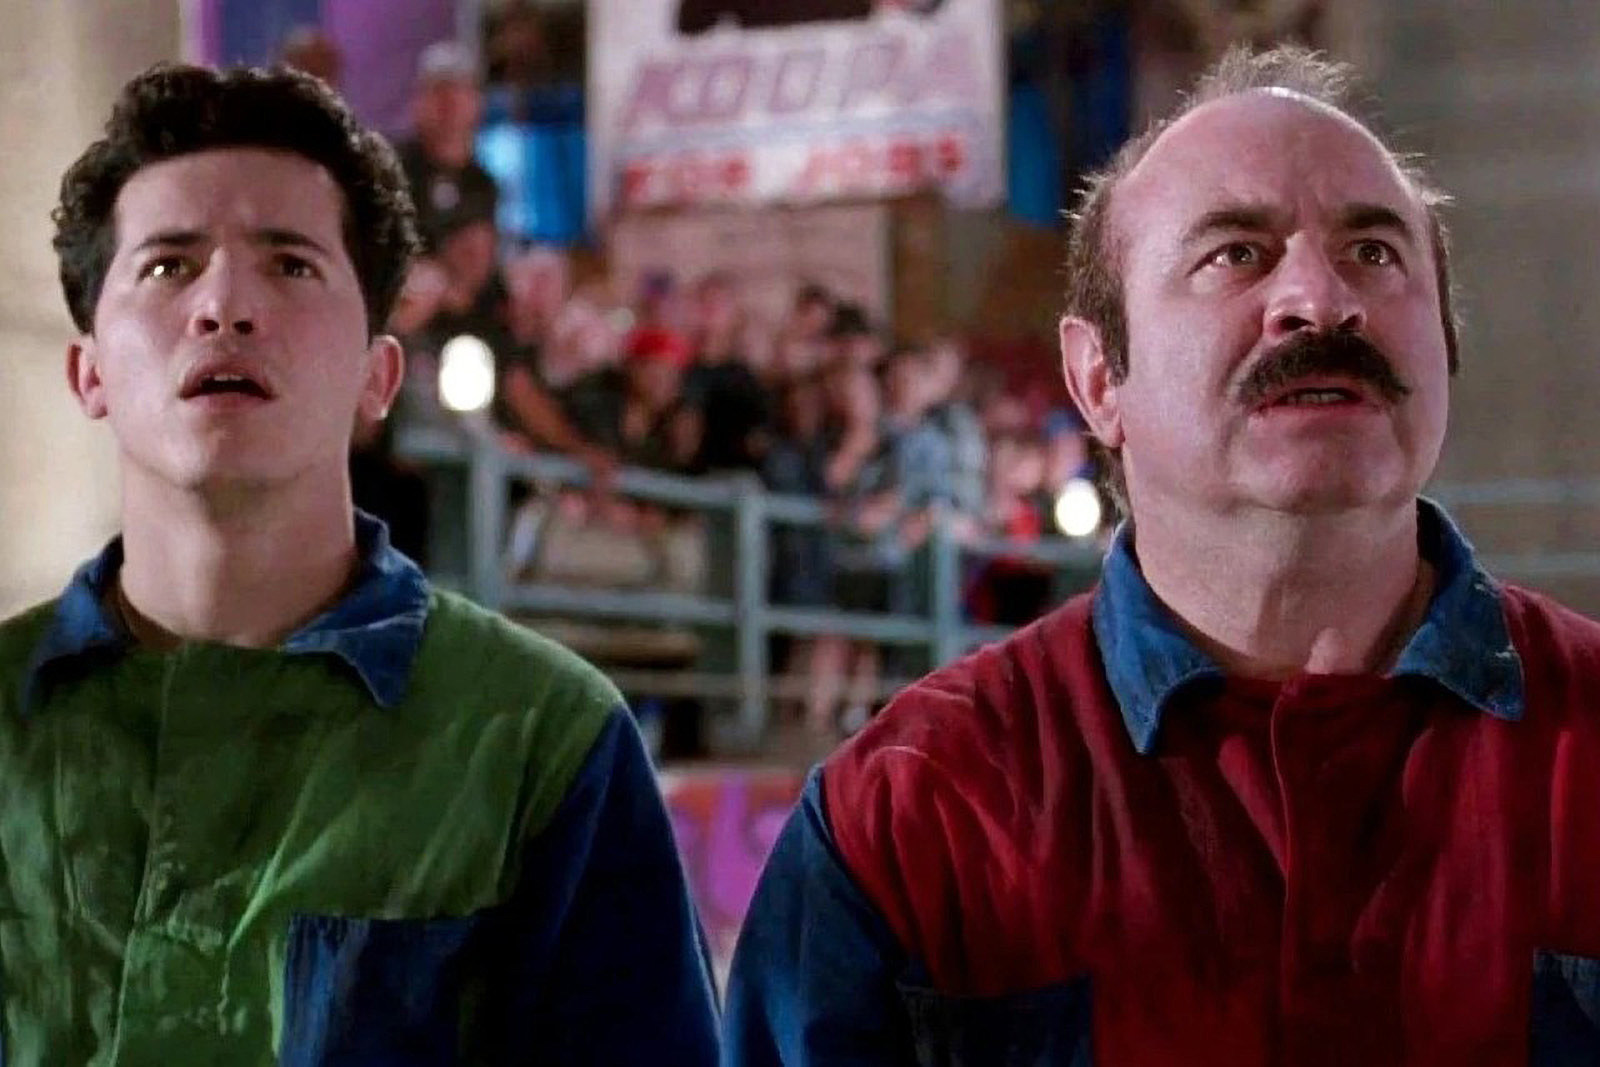 The Super Mario Bros. Movie' Budget: How Much Did It Cost?